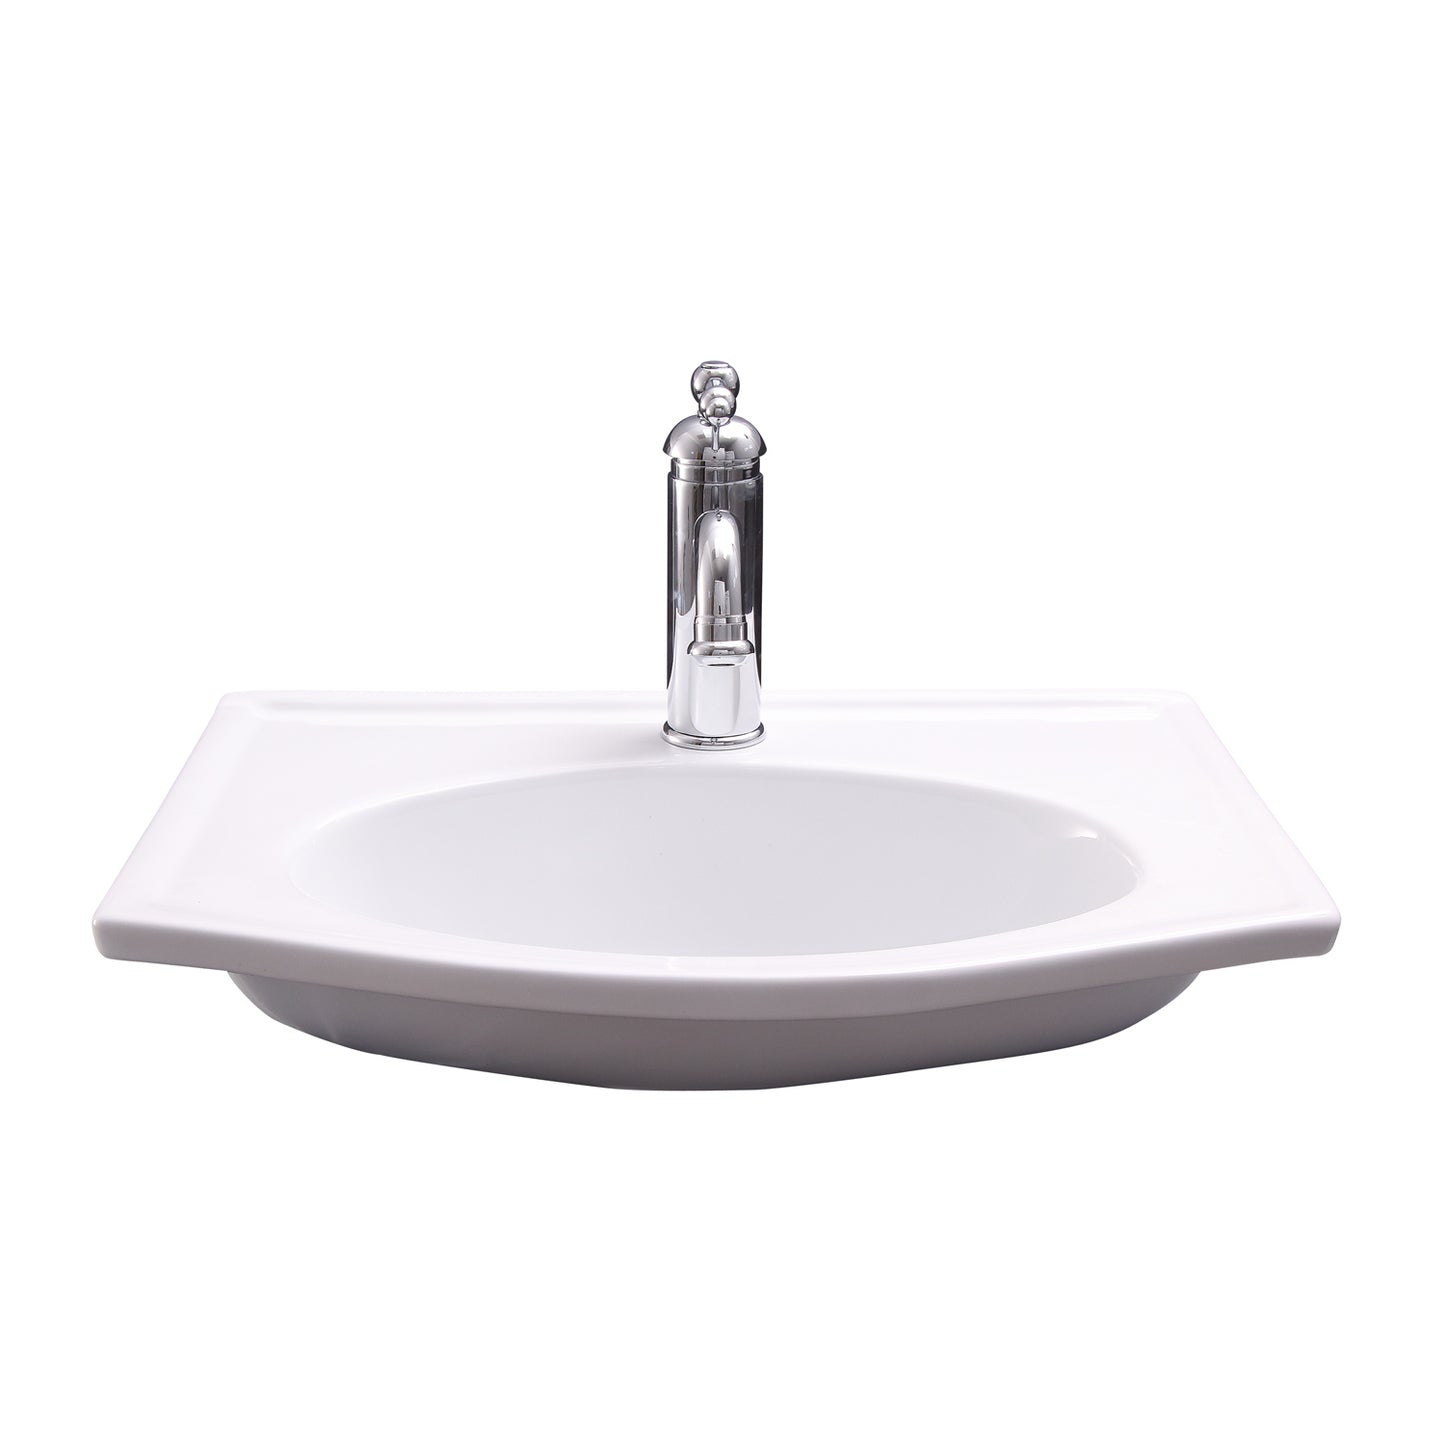 Carlisle Wall Hung 20" Bathroom Sink No Faucet Holes in White